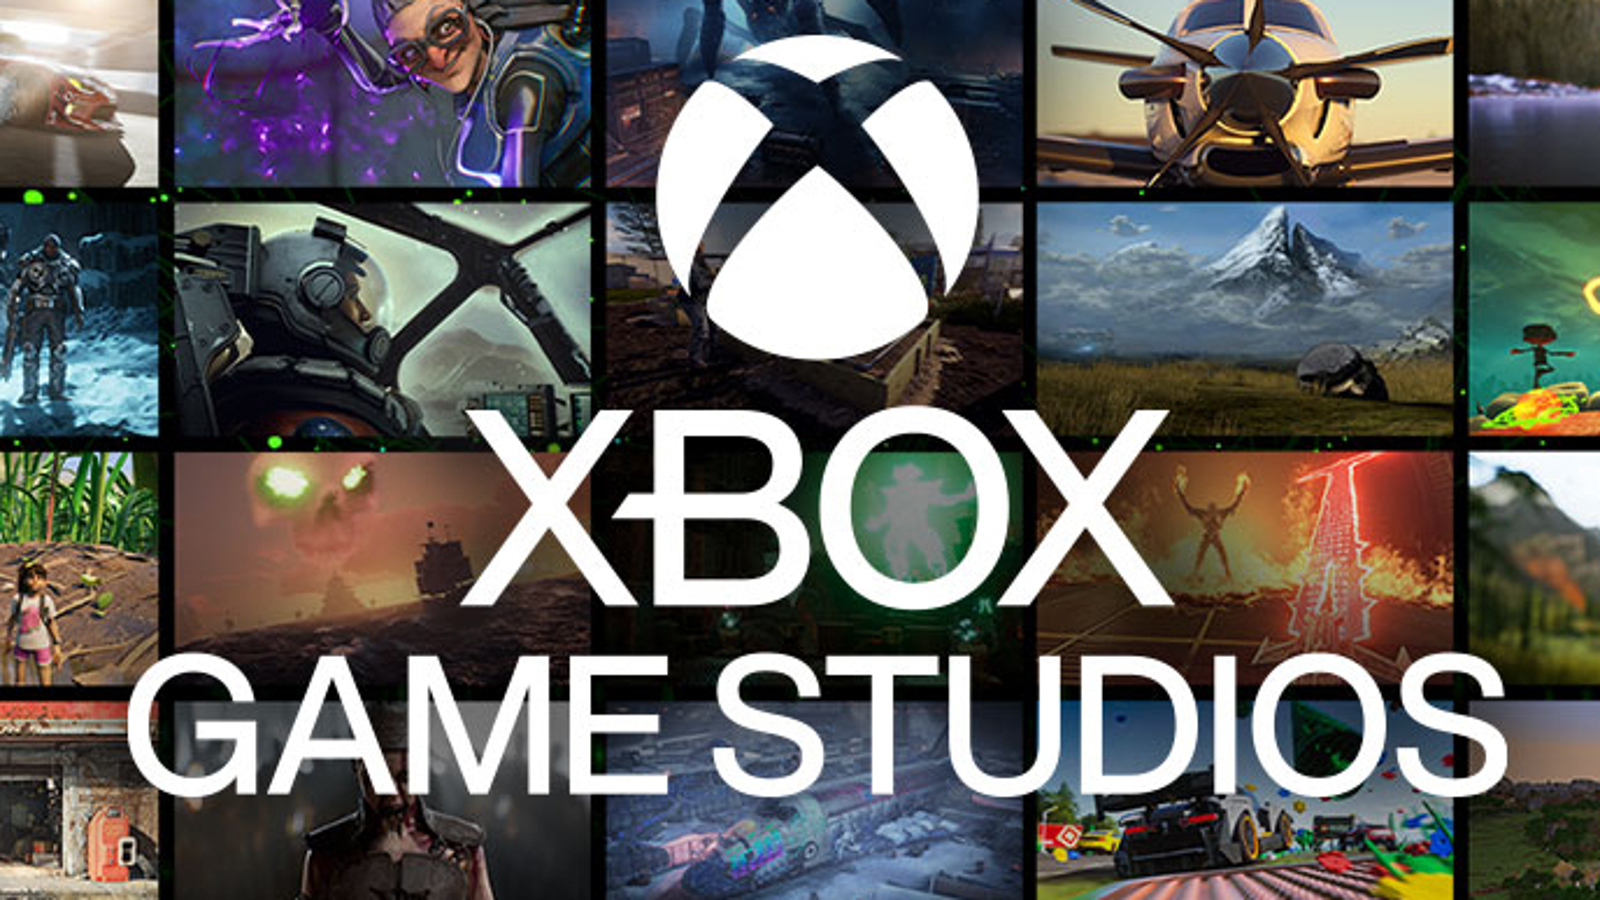 How big is Xbox Game Studios? I organized the studios by number of